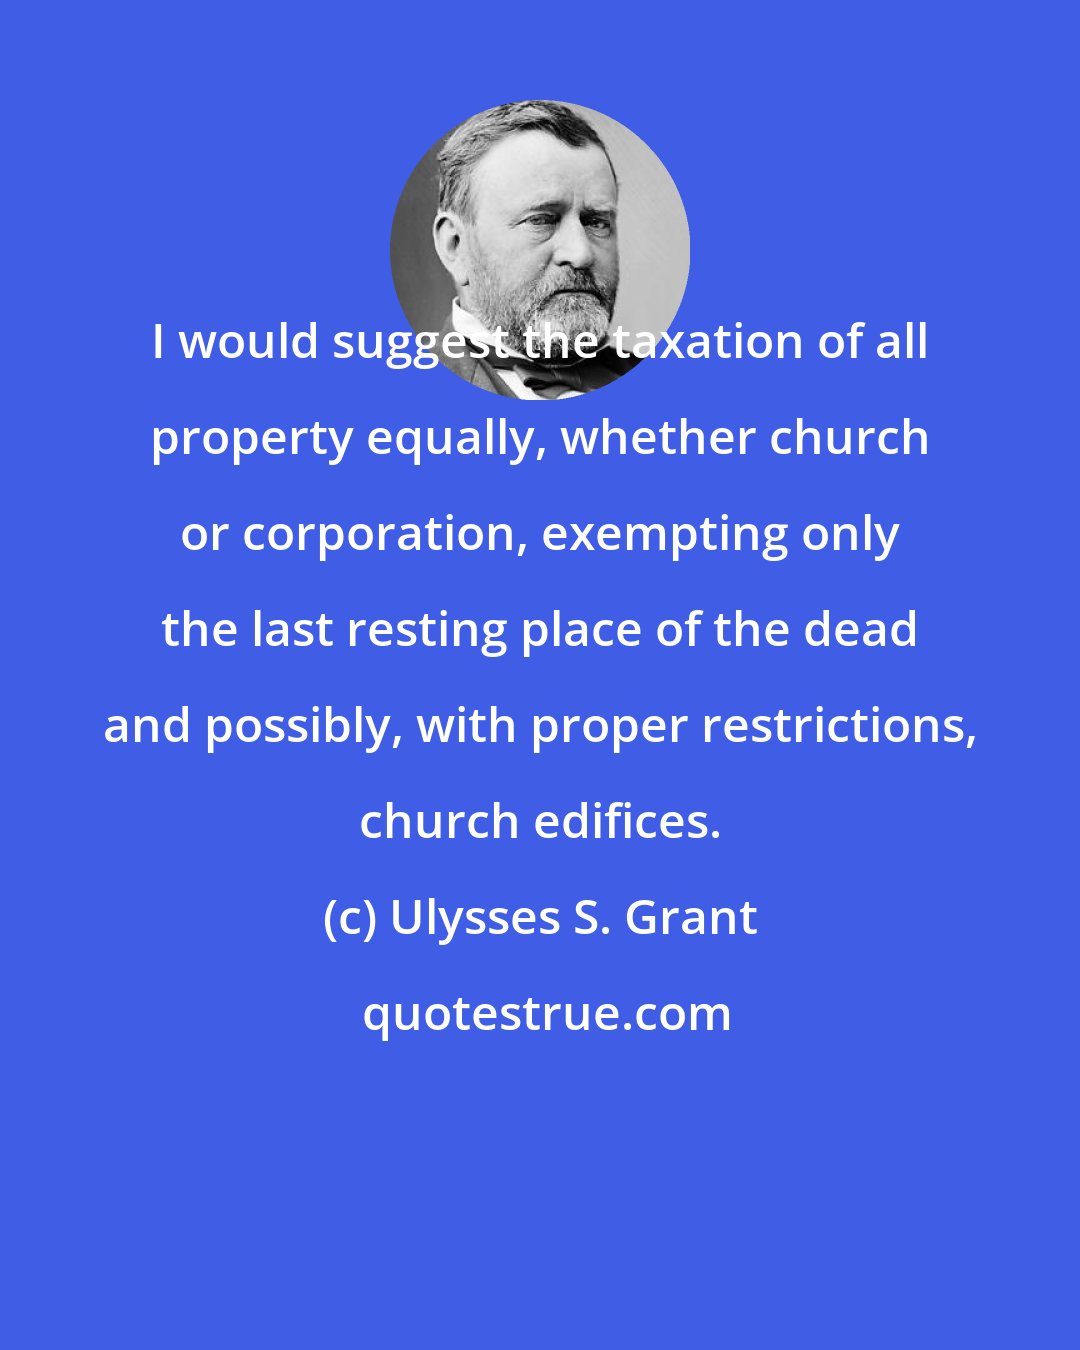 Ulysses S. Grant: I would suggest the taxation of all property equally, whether church or corporation, exempting only the last resting place of the dead and possibly, with proper restrictions, church edifices.